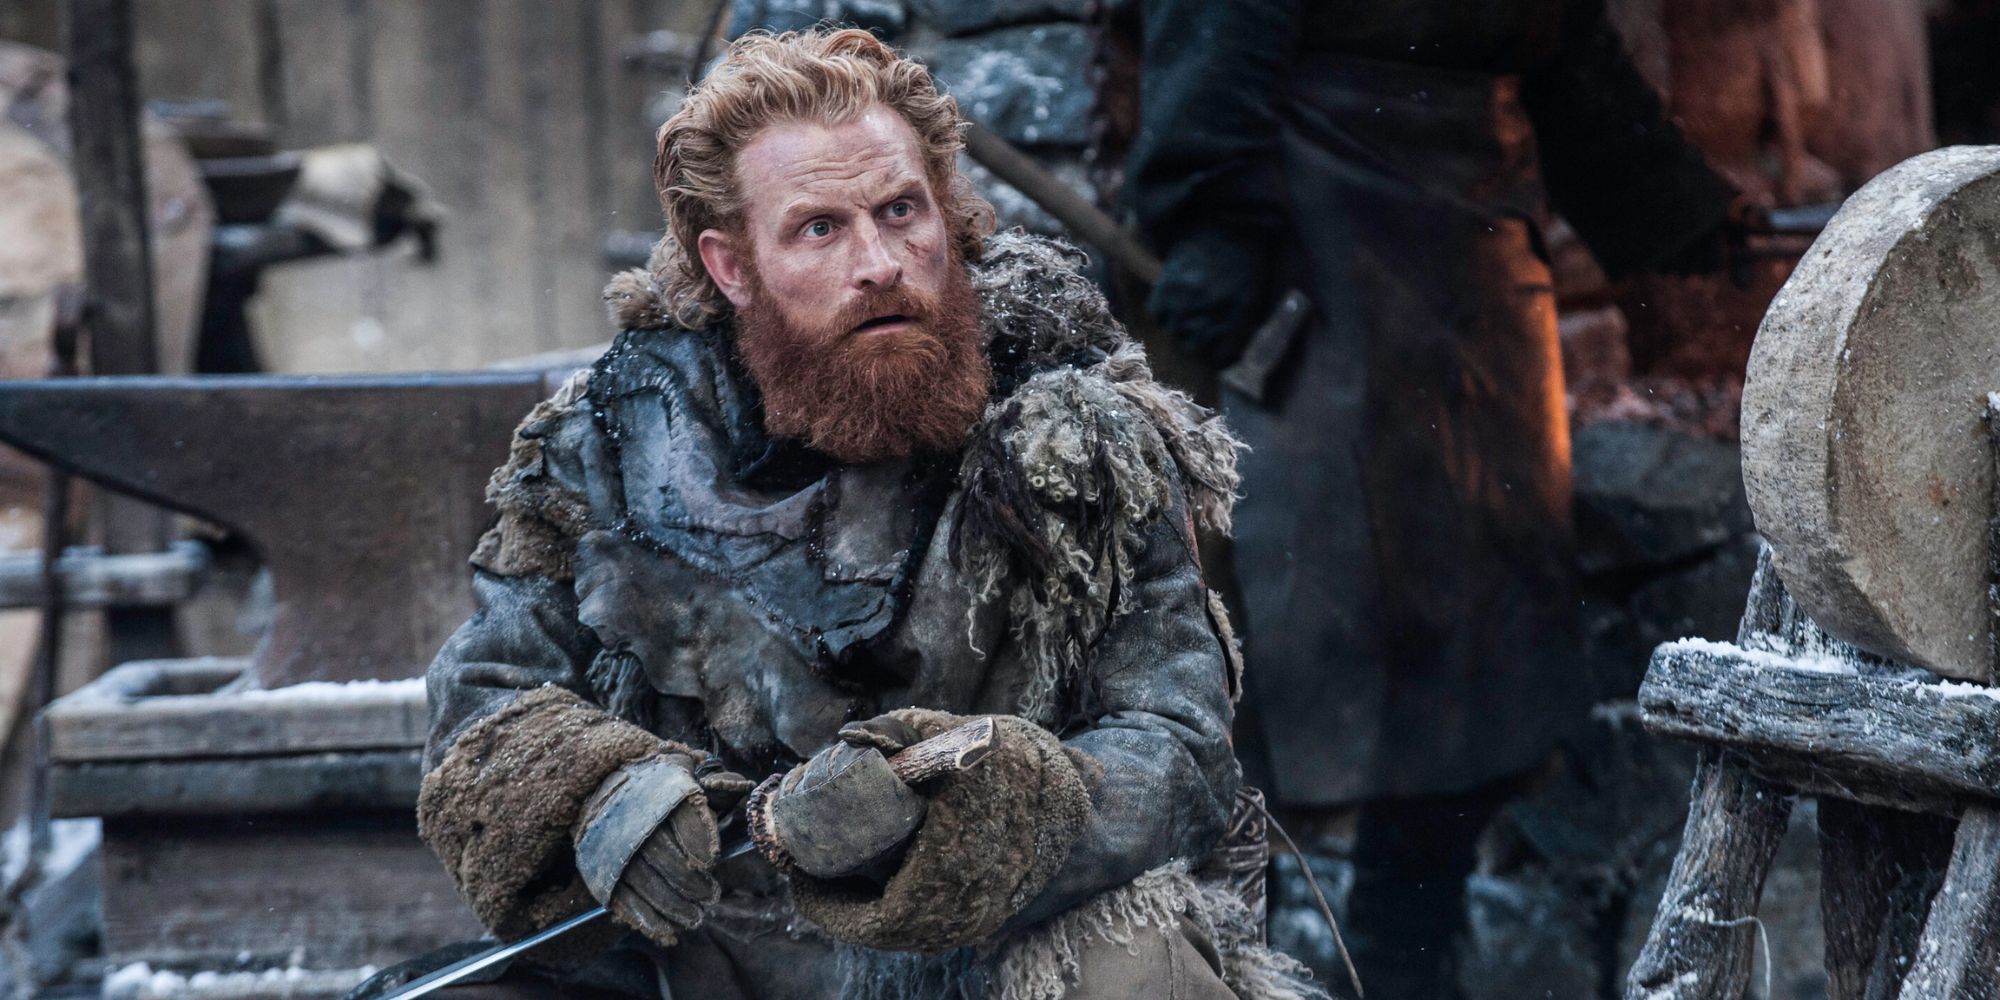 Kristofer Hivju as Tormund Giantsbane looking to his left with a surprised expression in Game of Thrones